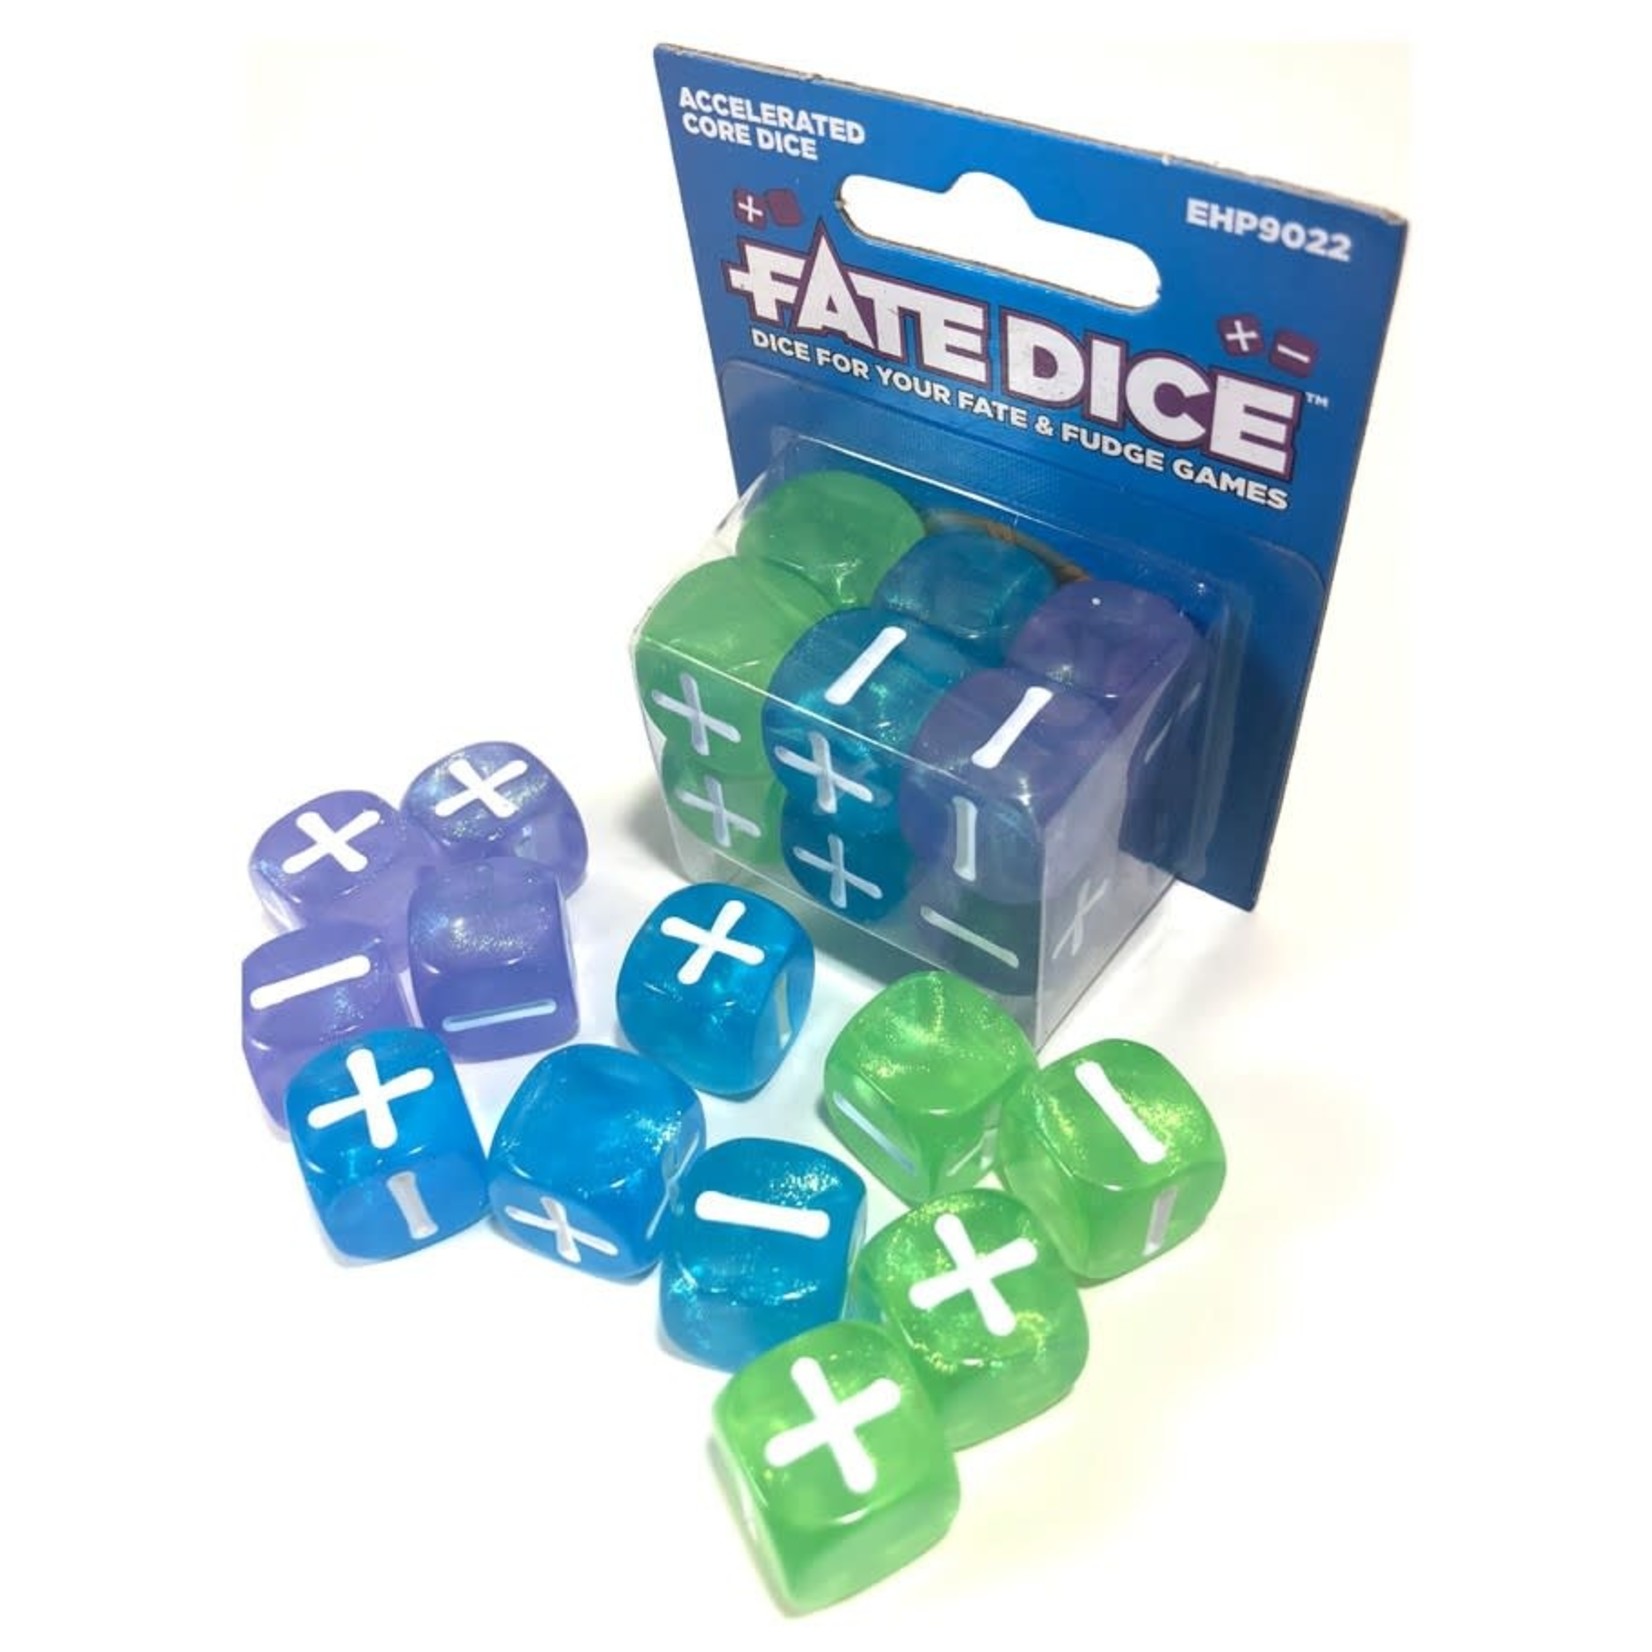 Evil Hat Productions LLC Fate Dice: Accelerated Core Dice